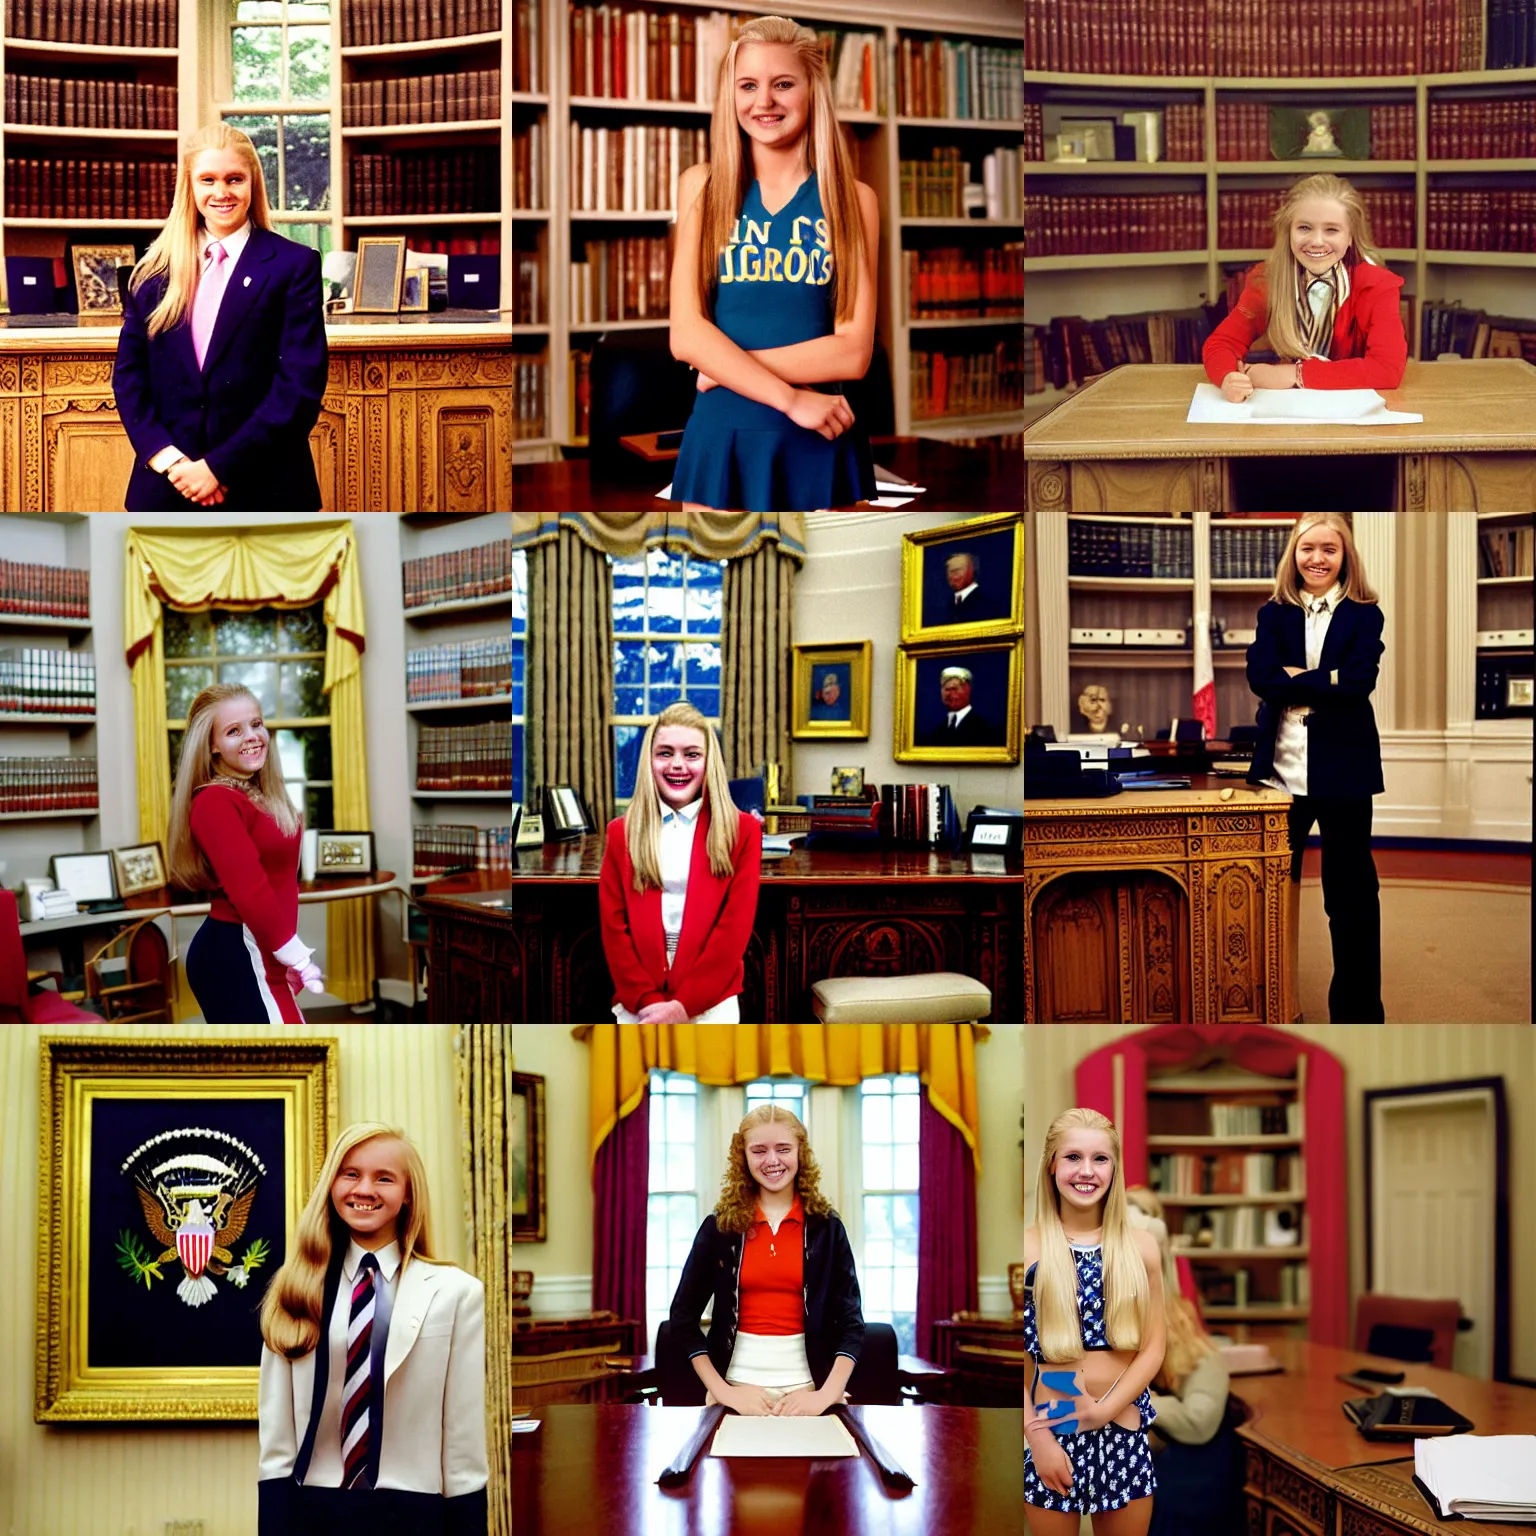 Prompt: A teenage girl cheerleader, long blond hair, standing in front of a desk in the Oval Office, grinning, as president of the united states, official photo portrait by Steve McCurry